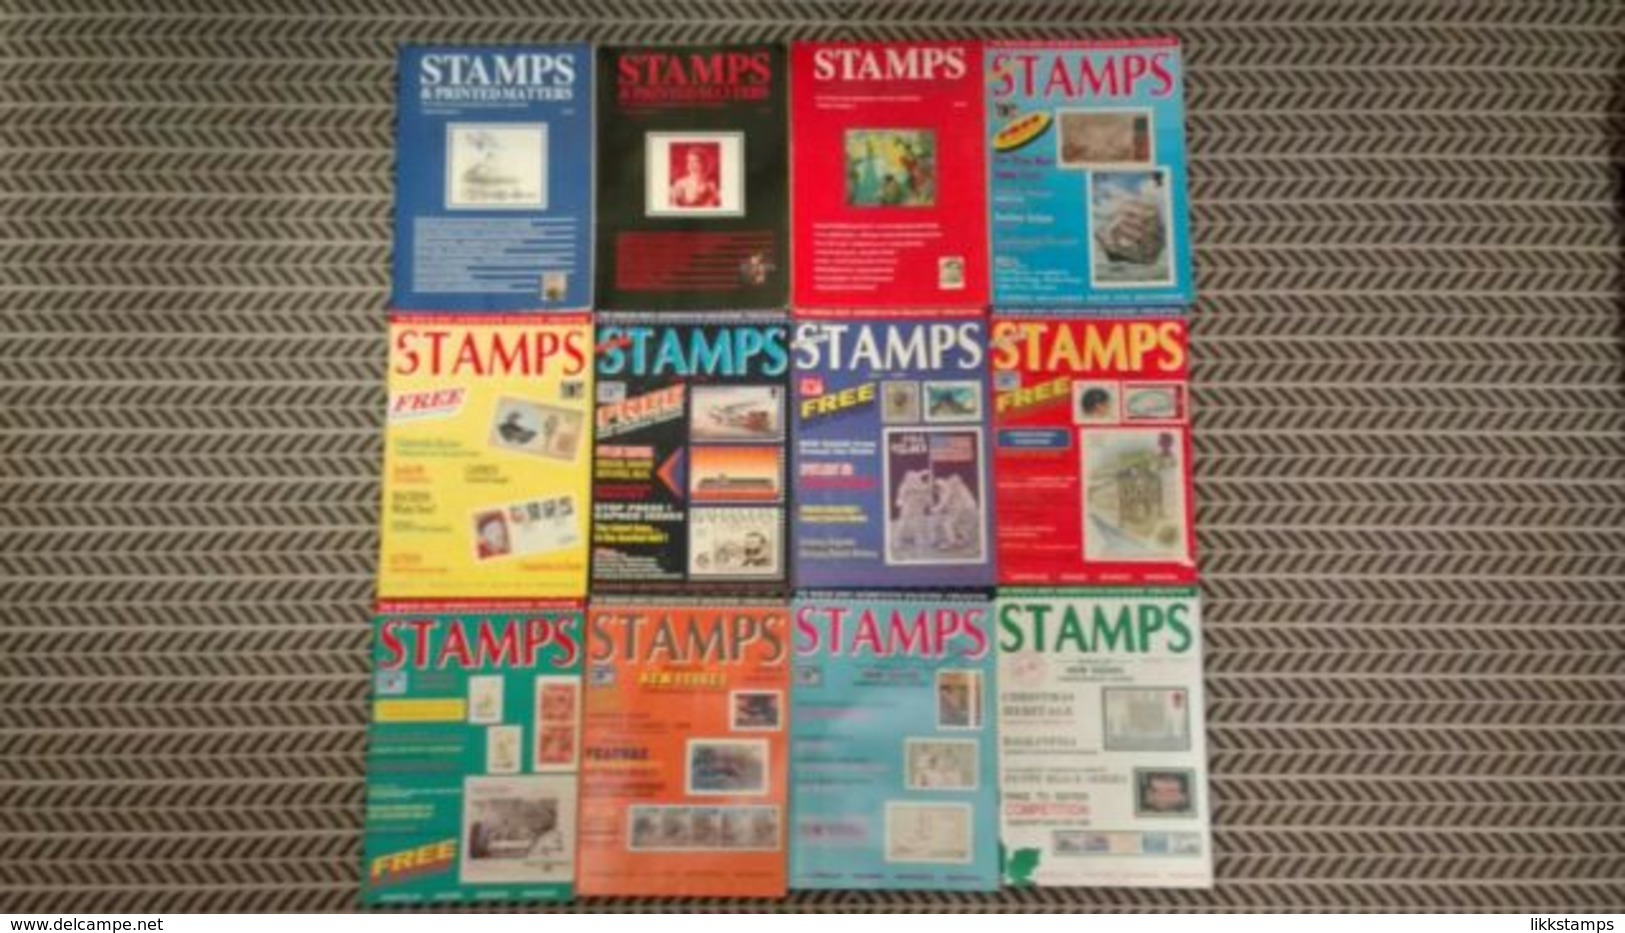 STAMPS AND PRINTED MATTER/STAMPS MAGAZINES JANUARY 1989 TO DECEMBER 1989  VOLUME 9 #L0011 - Engels (vanaf 1941)